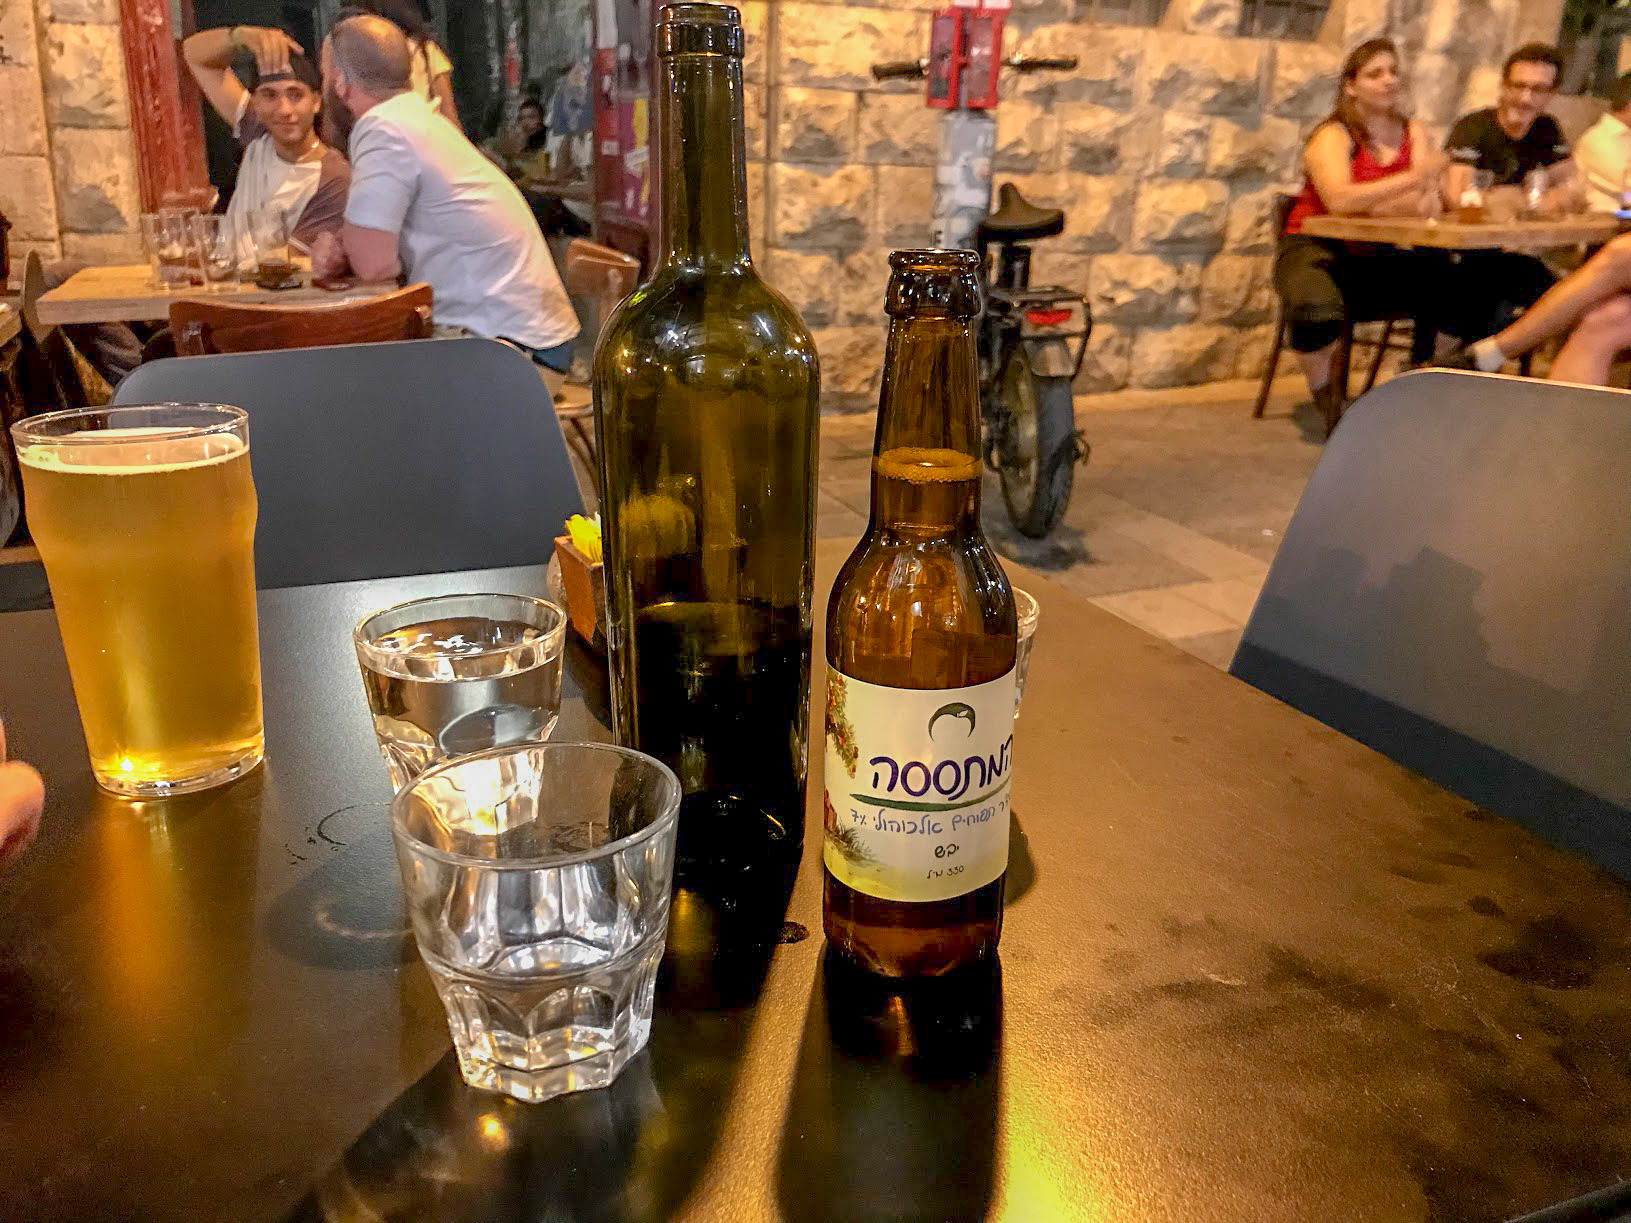 drinks on an outside table at The Sira pub, Jerusalem